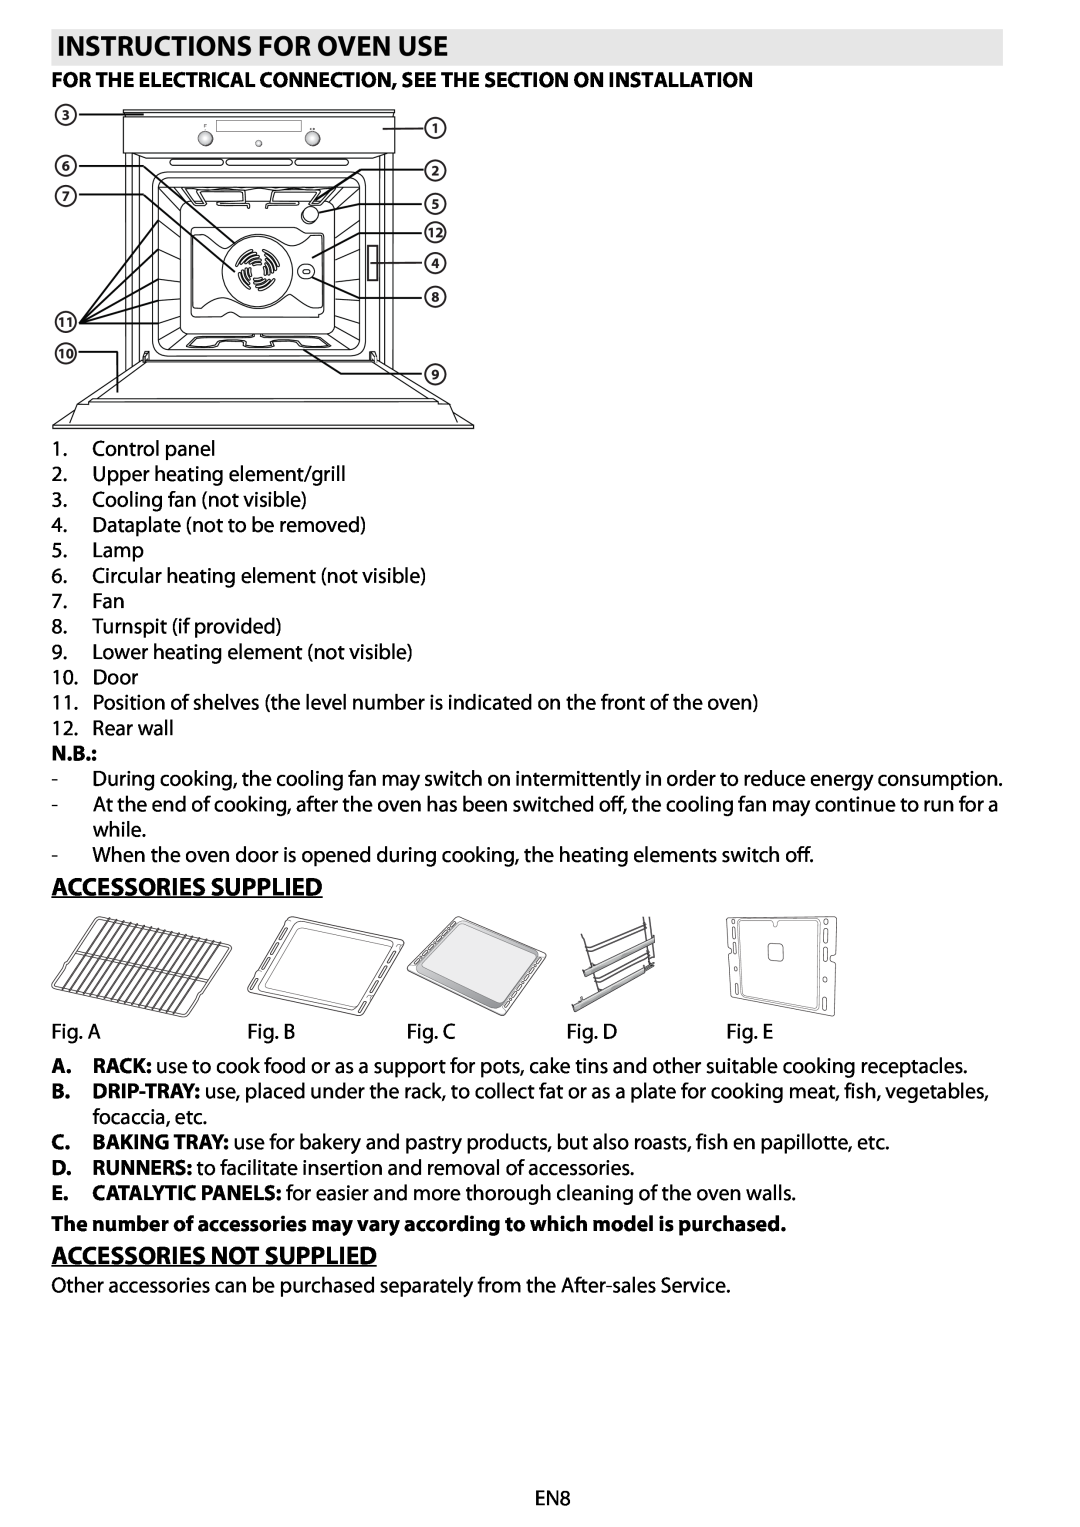 Whirlpool AKZ 561 manual Instructions For Oven Use, Accessories Supplied, Accessories Not Supplied 